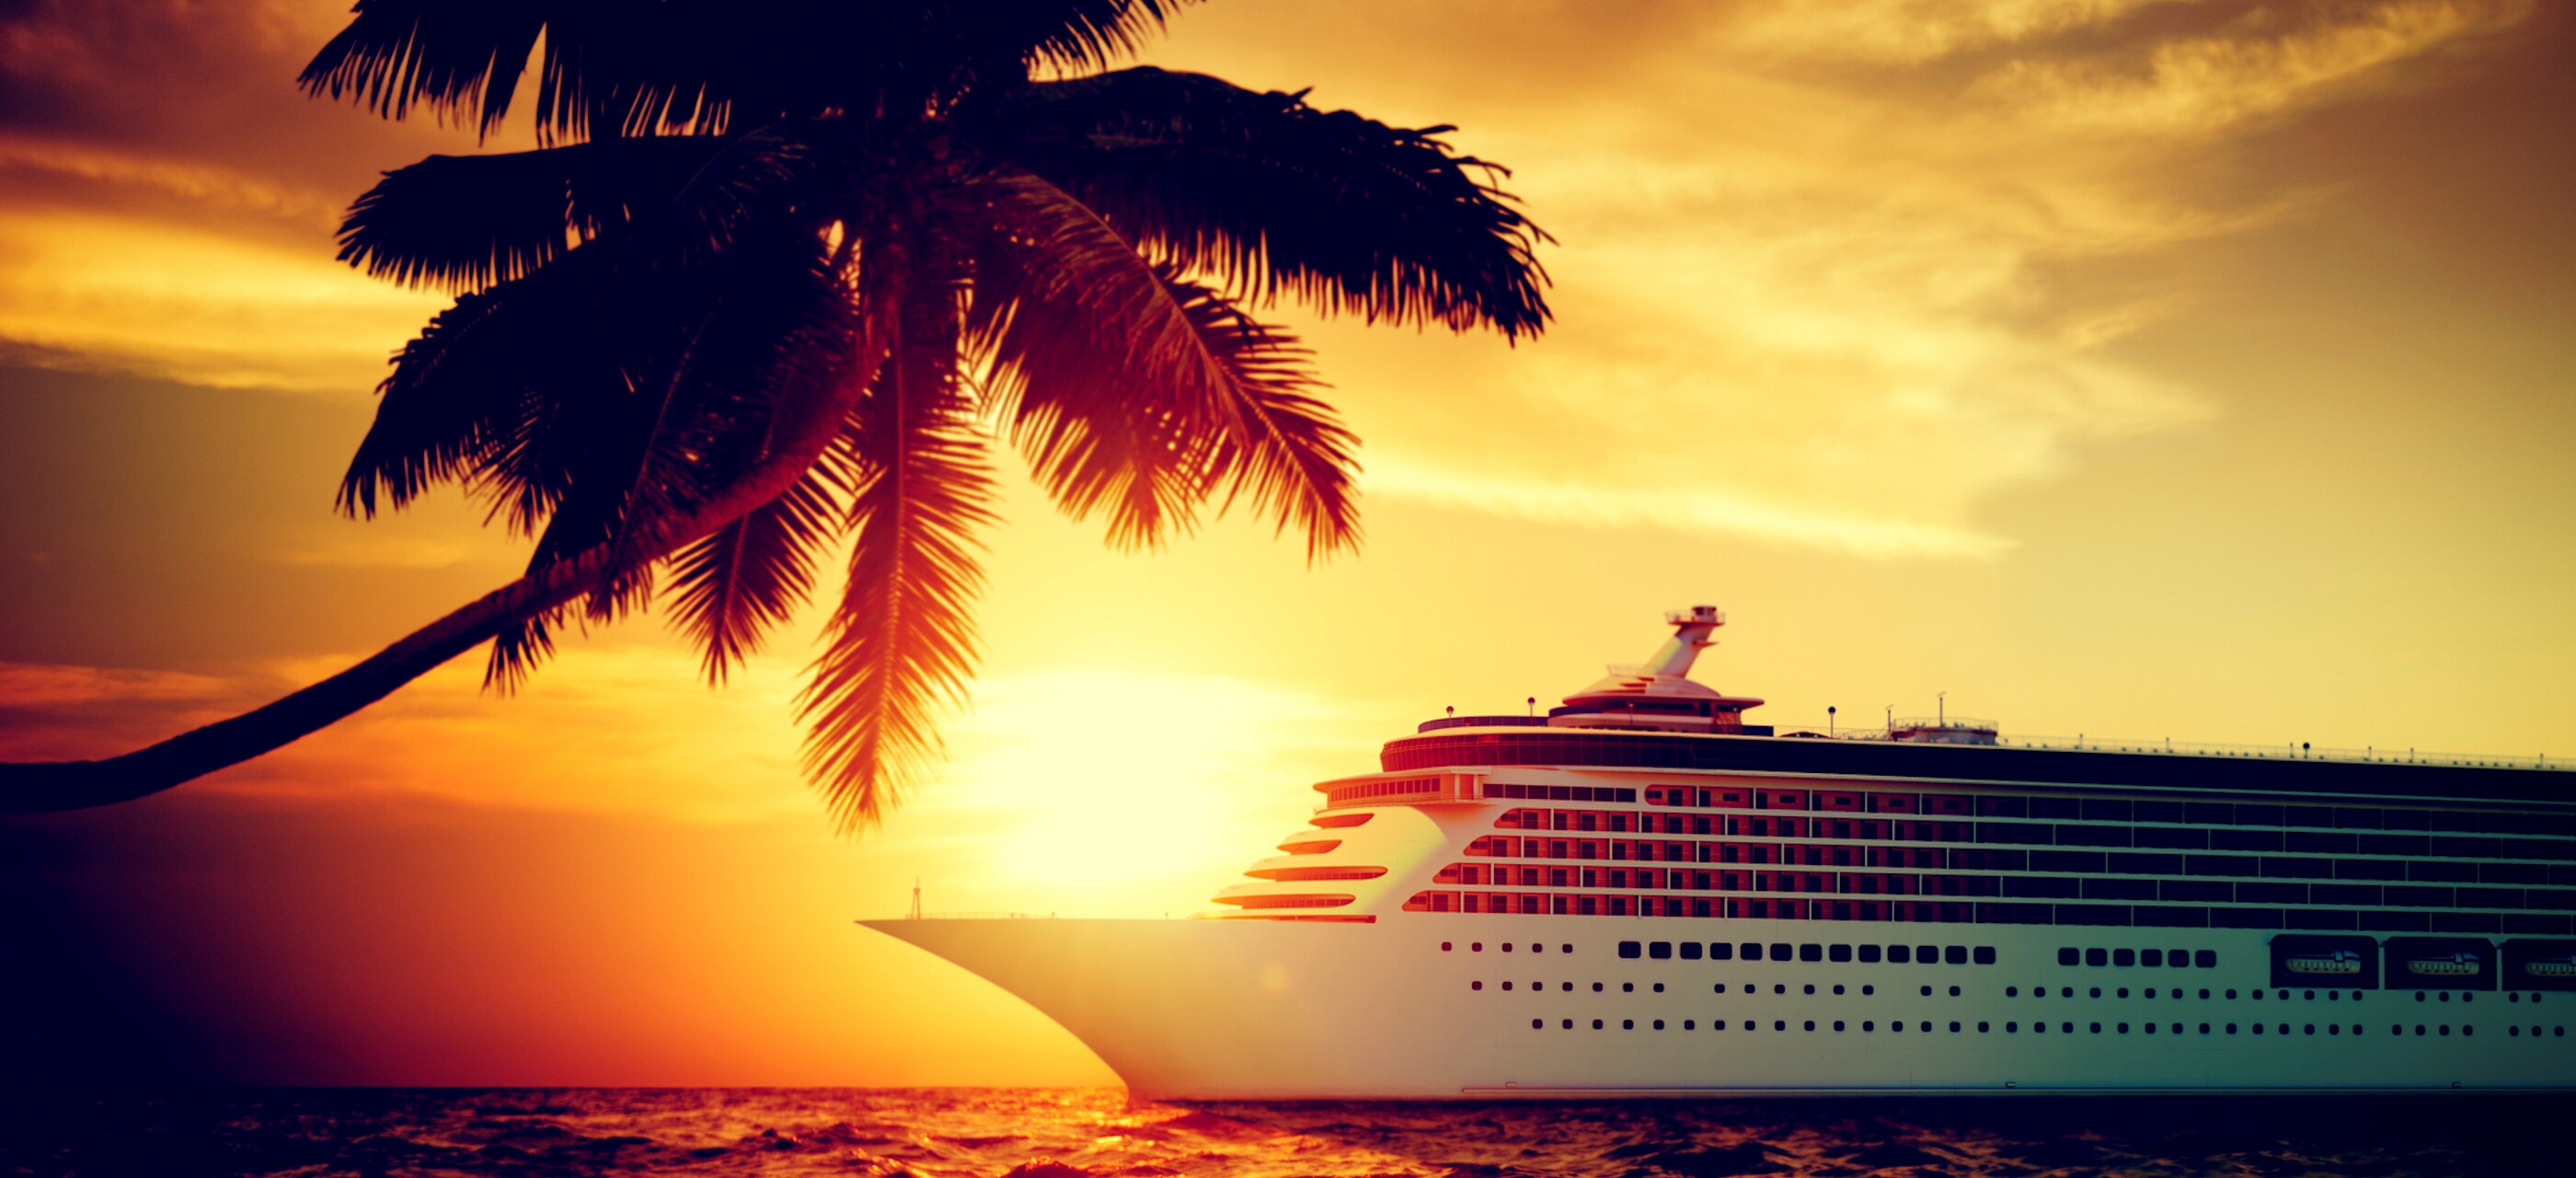 A cruise ship and a palm tree during golden hour